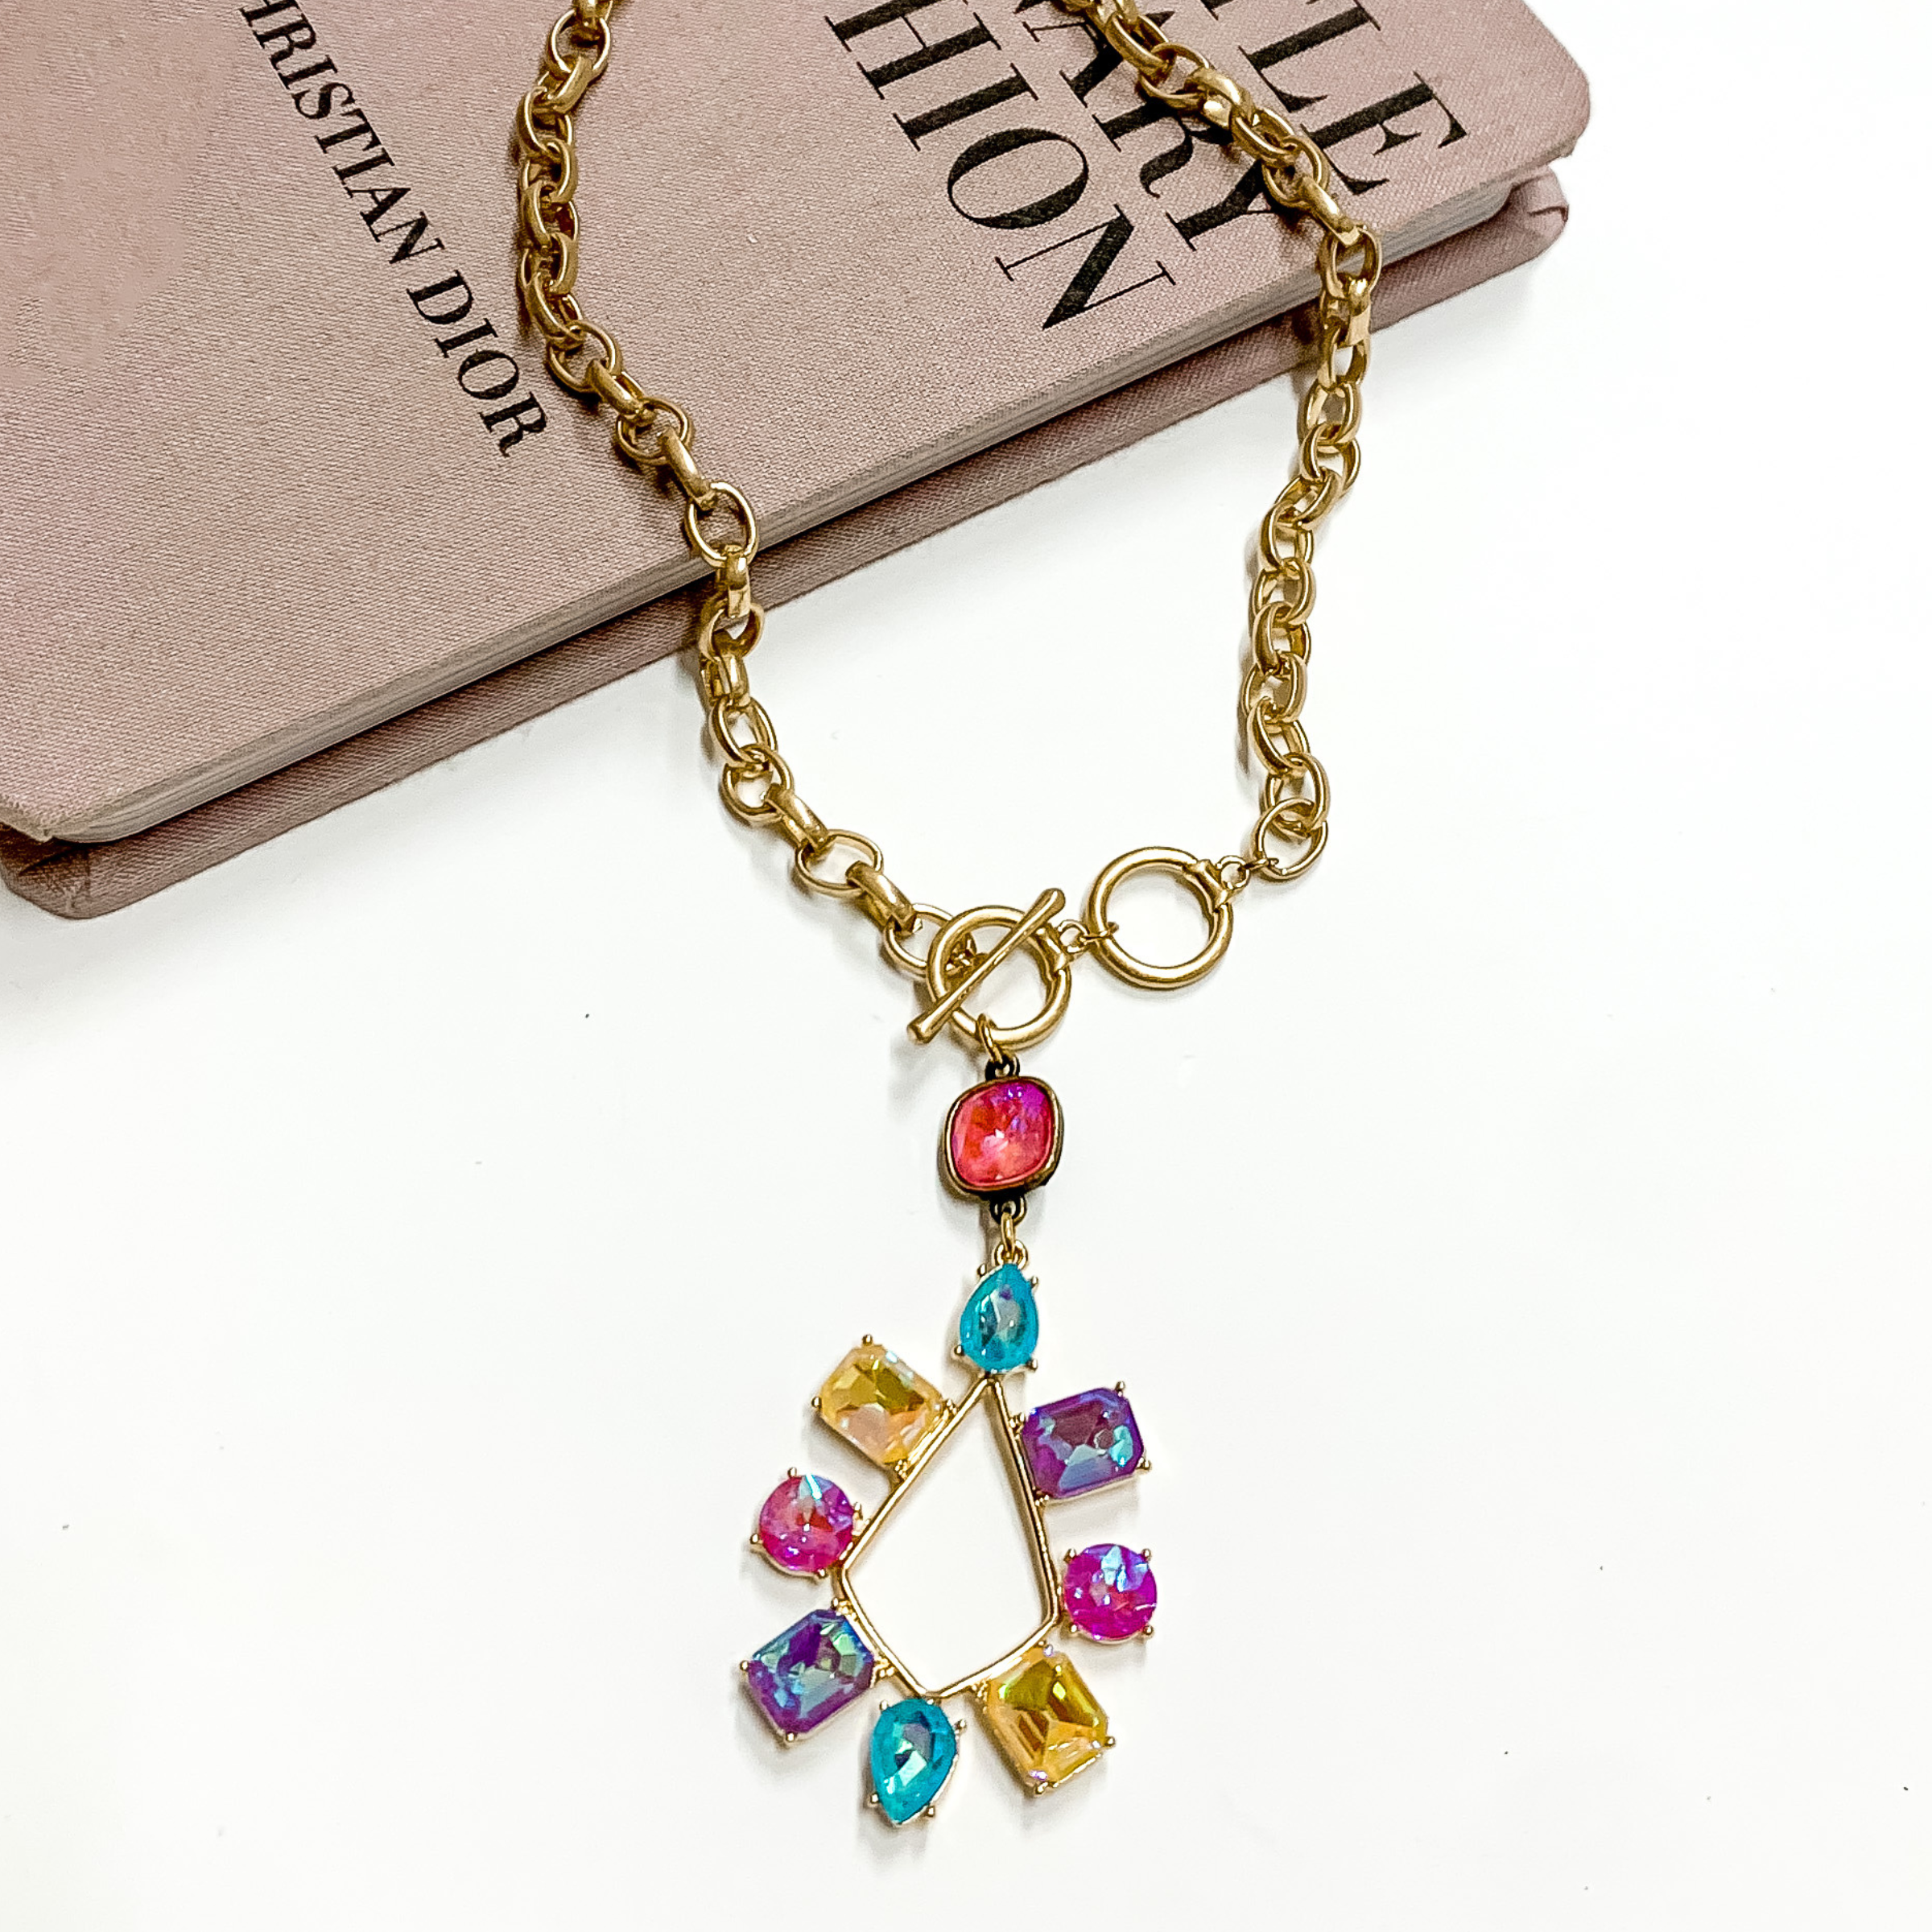 Gold chain necklace with toggle, front clasp with a pink cushion cut crystal drop and a multi color crystal teardrop. This necklace is pictured laying partially on a mauve colored book on a white background. 